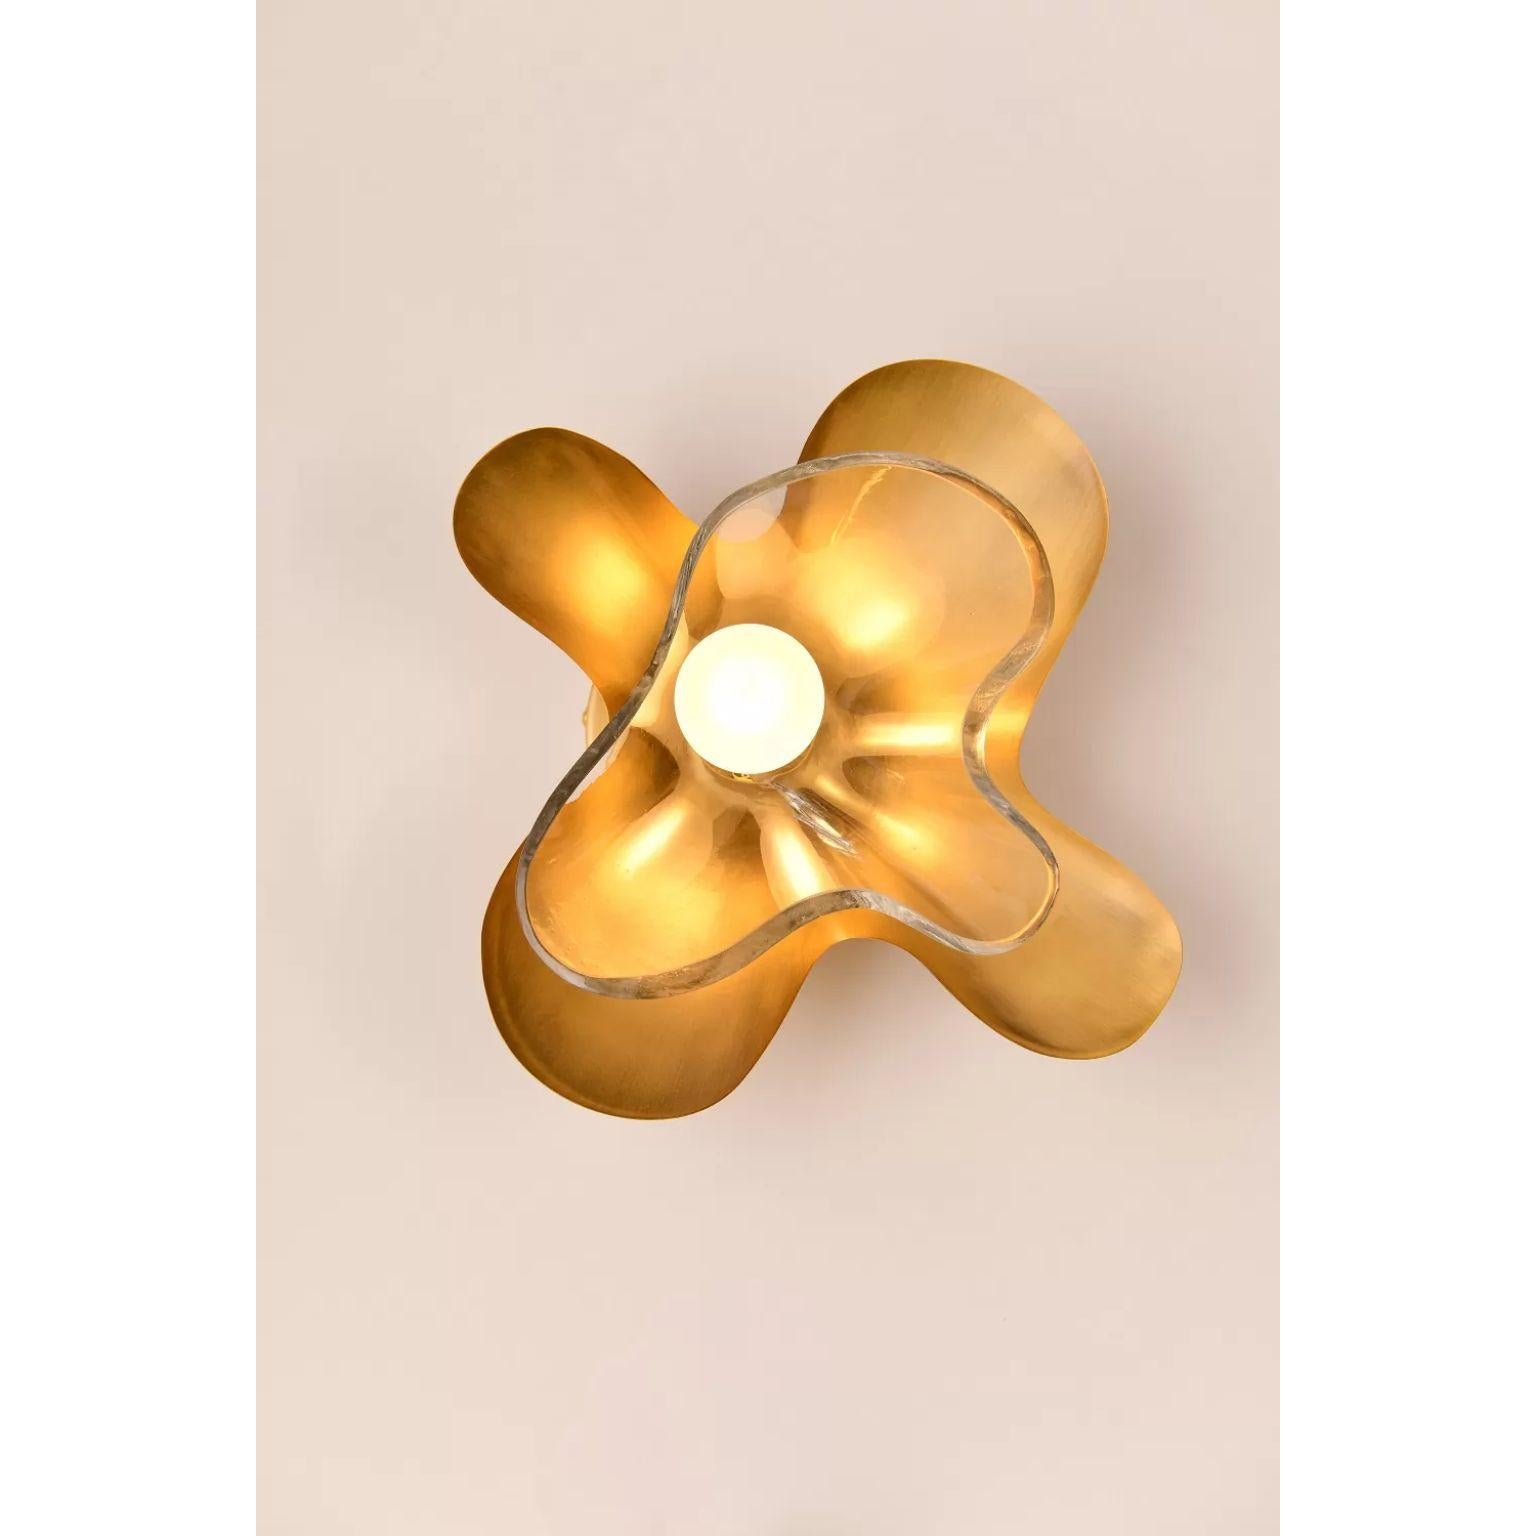 Clear Butterfly Wall Sconce by Dainte
Dimensions: D 13.5 x W 28.5 x H 28 cm.
Materials: Glass and brass. 

The Butterfly wall sconce features an elegant silhouette modeled after the wings of a butterfly in motion. Layered textured brass and glass, a